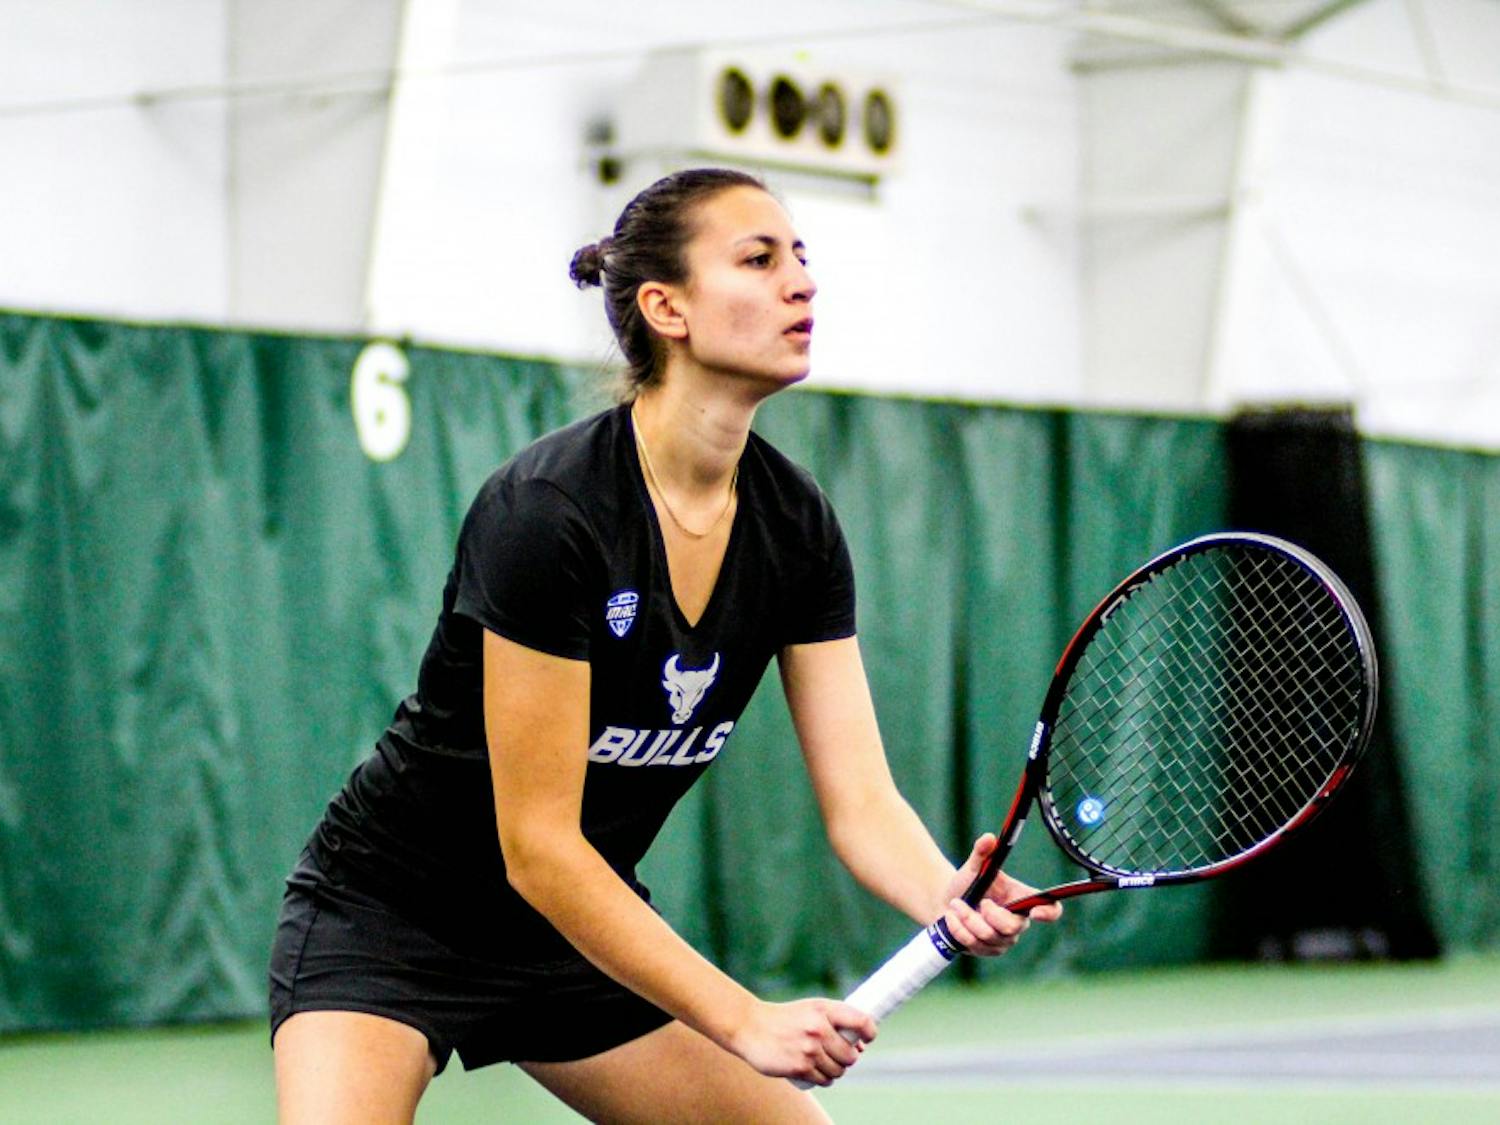 Tanja Stojanovska prepares to receive the serve. She hopes to upset on the second singles court as Buffalo takes on Northwestern in the NCAA tournament Friday.